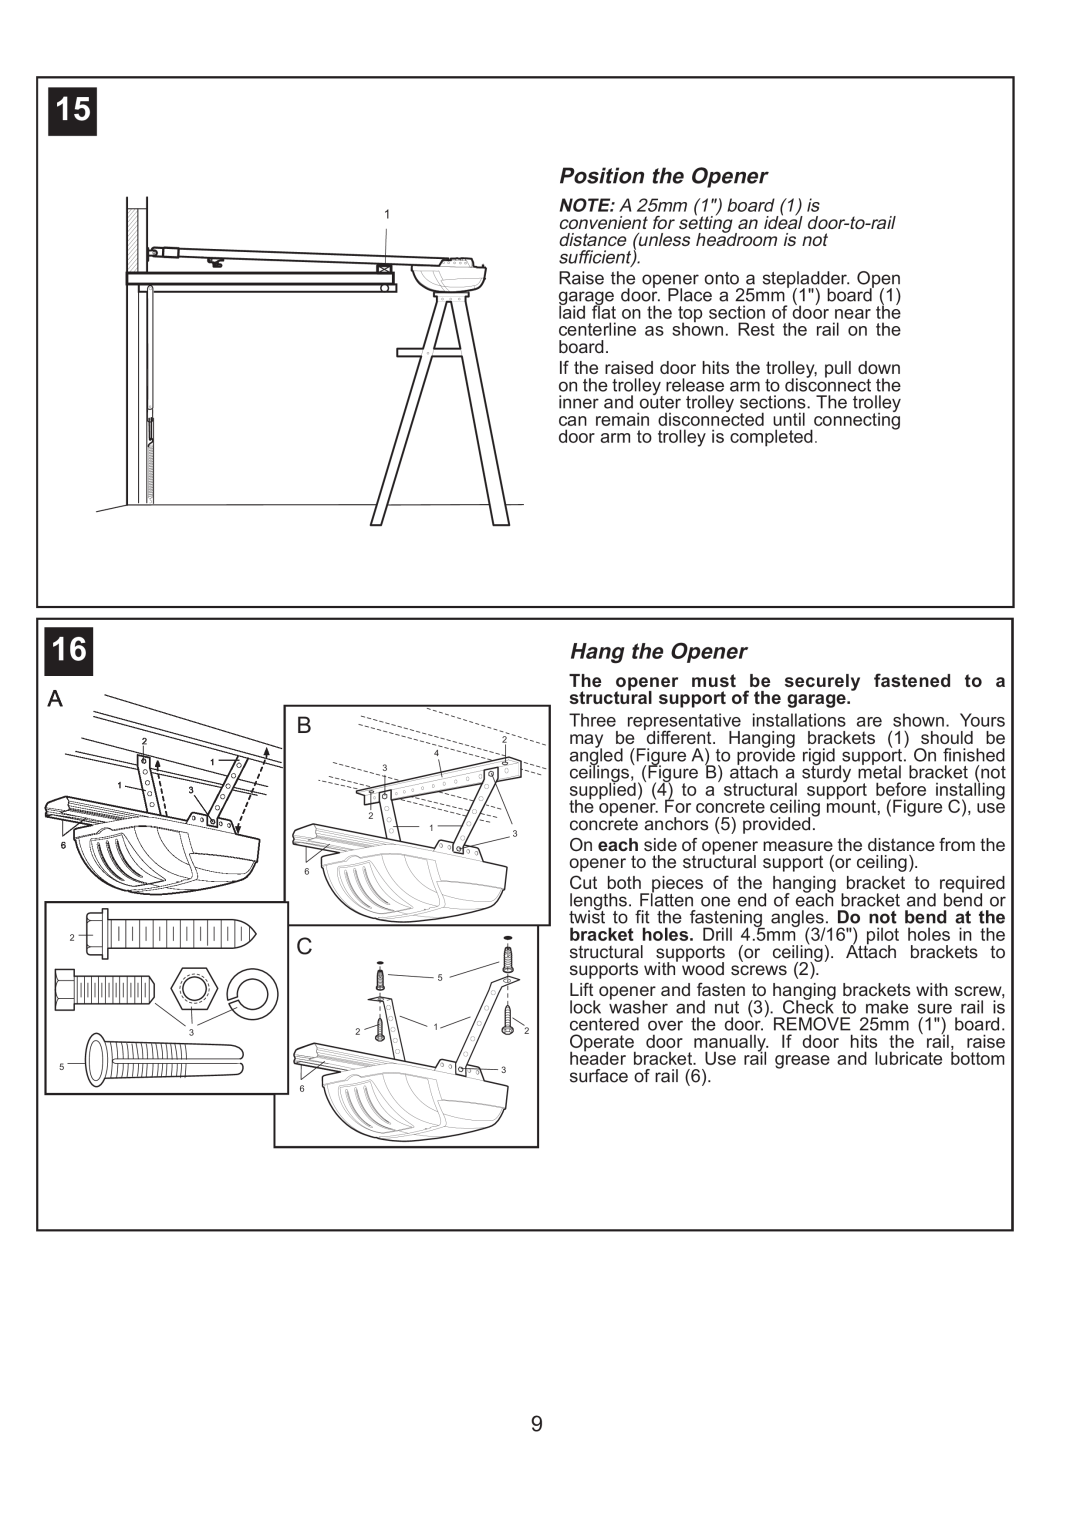 Sigma ML750 instruction manual Position the Opener, Hang the Opener 